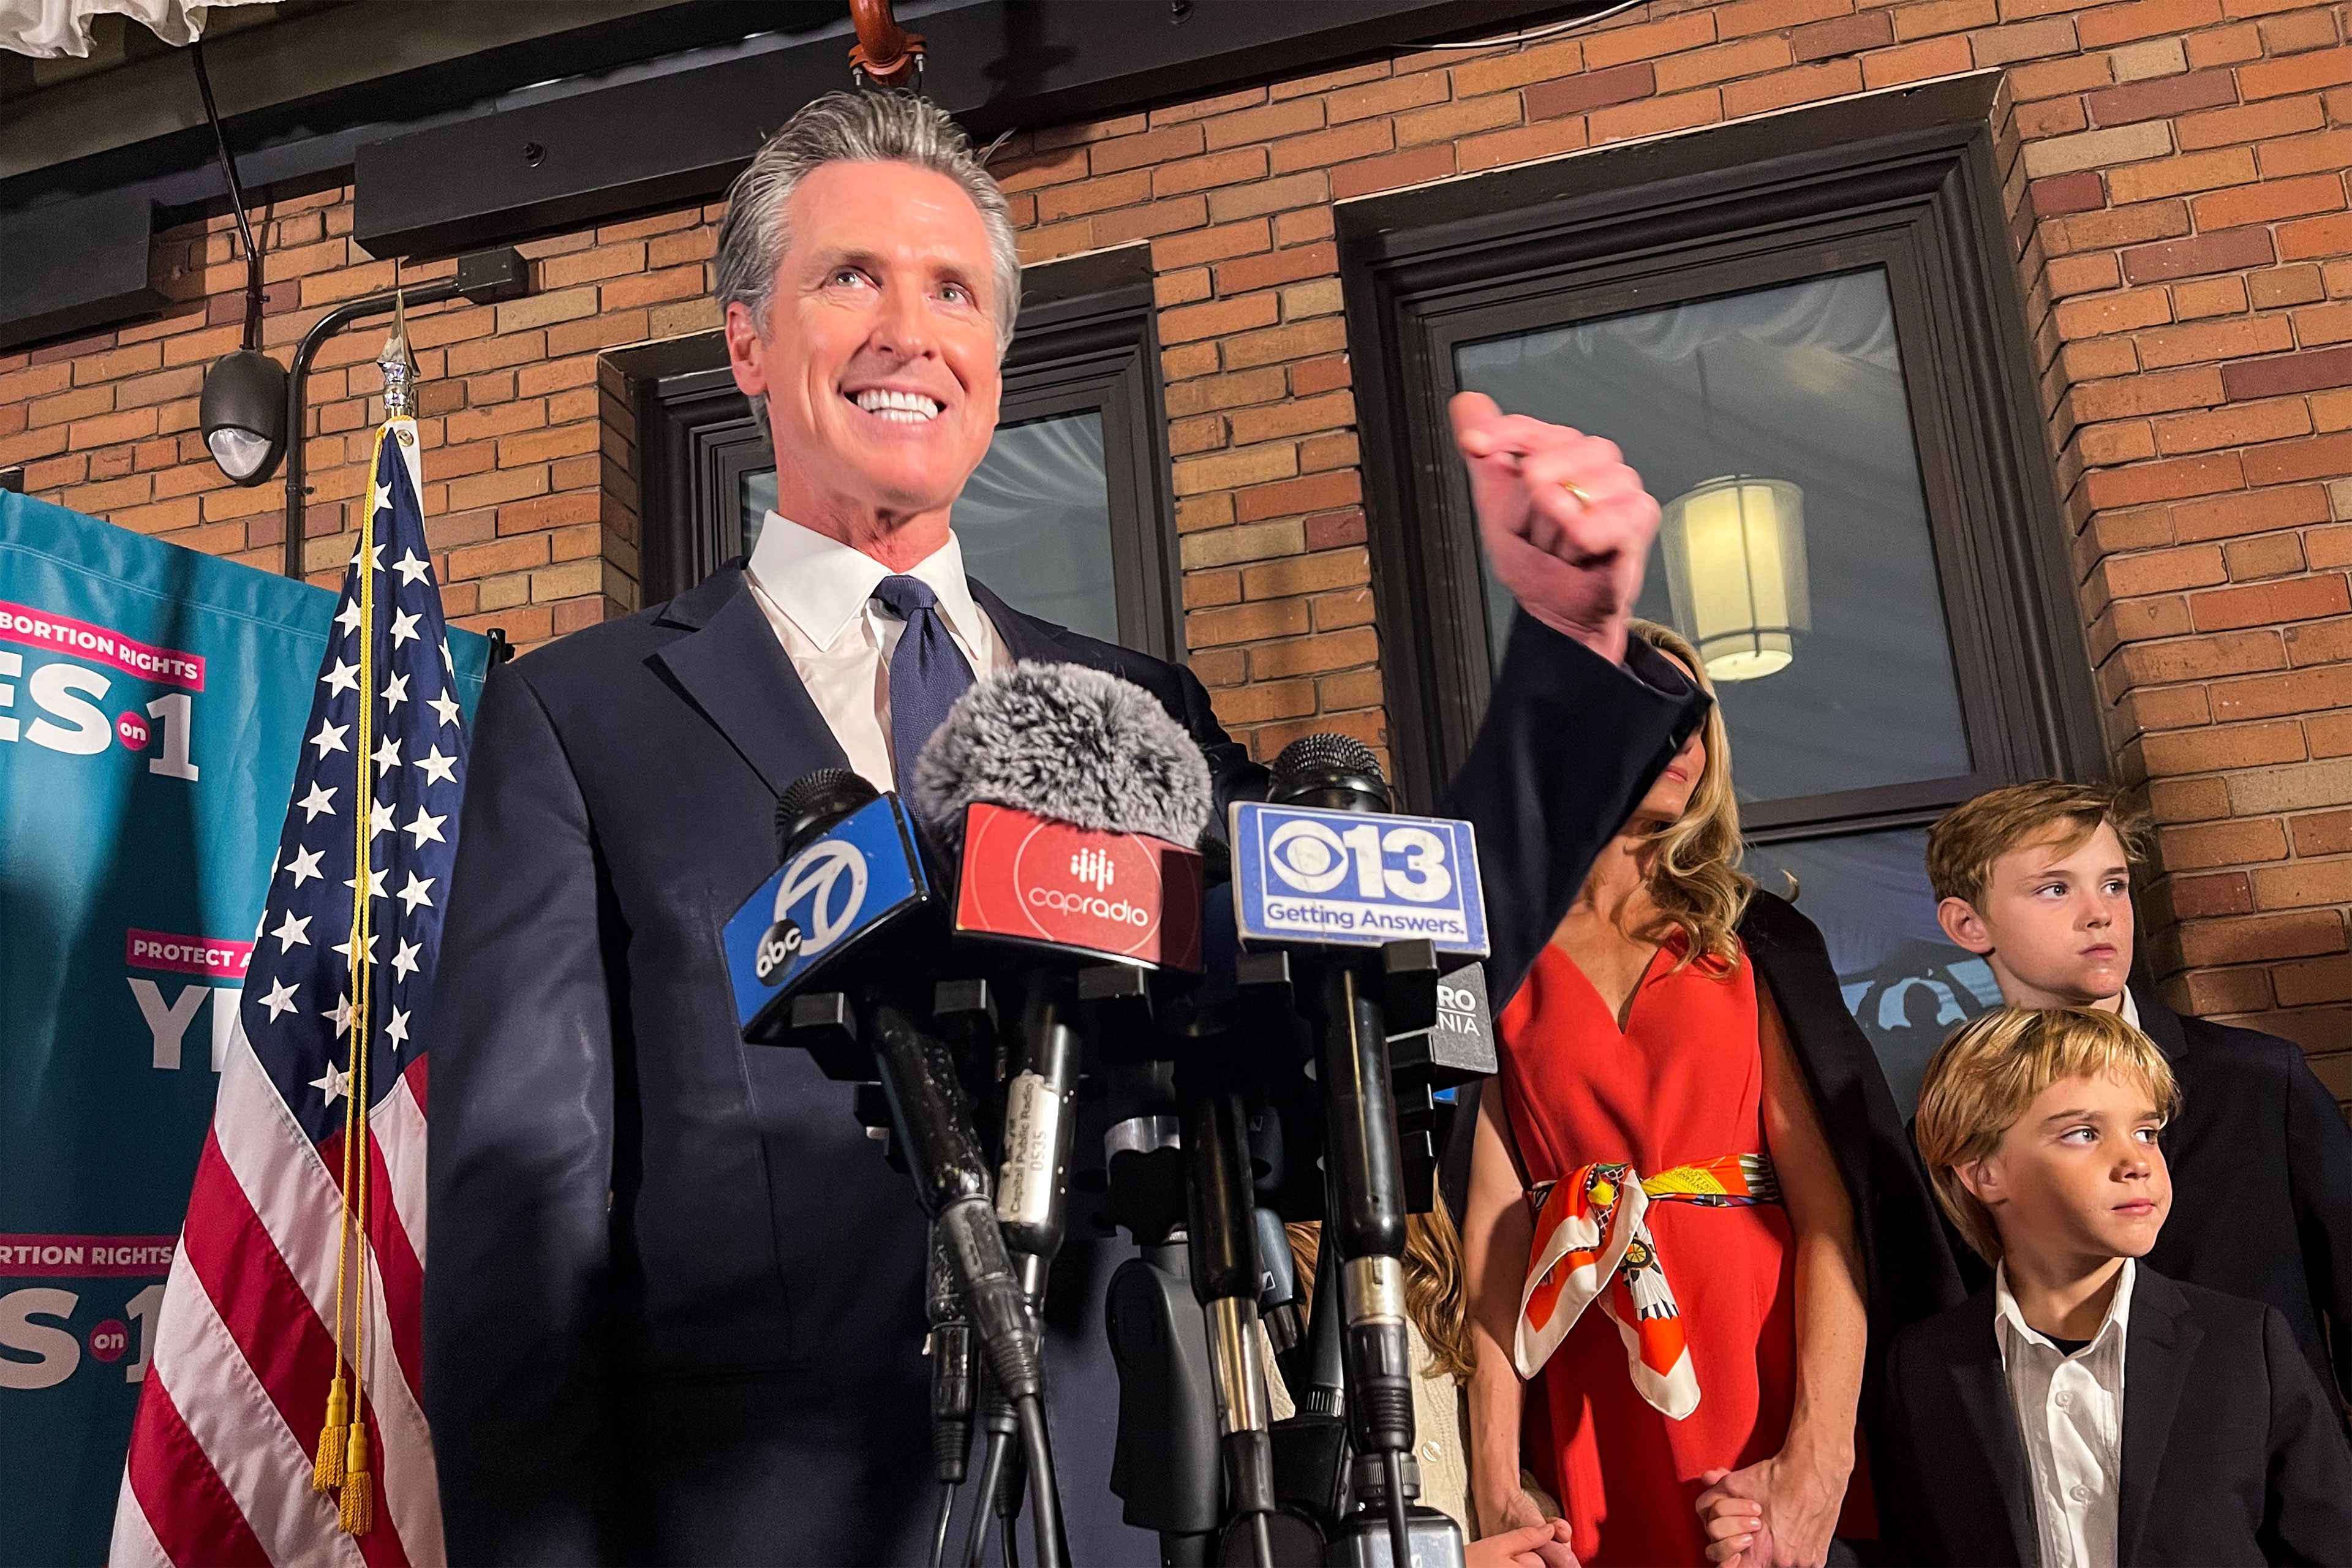 A photo shows Gov. Gavin Newsom at an event with news microphones in front of him.